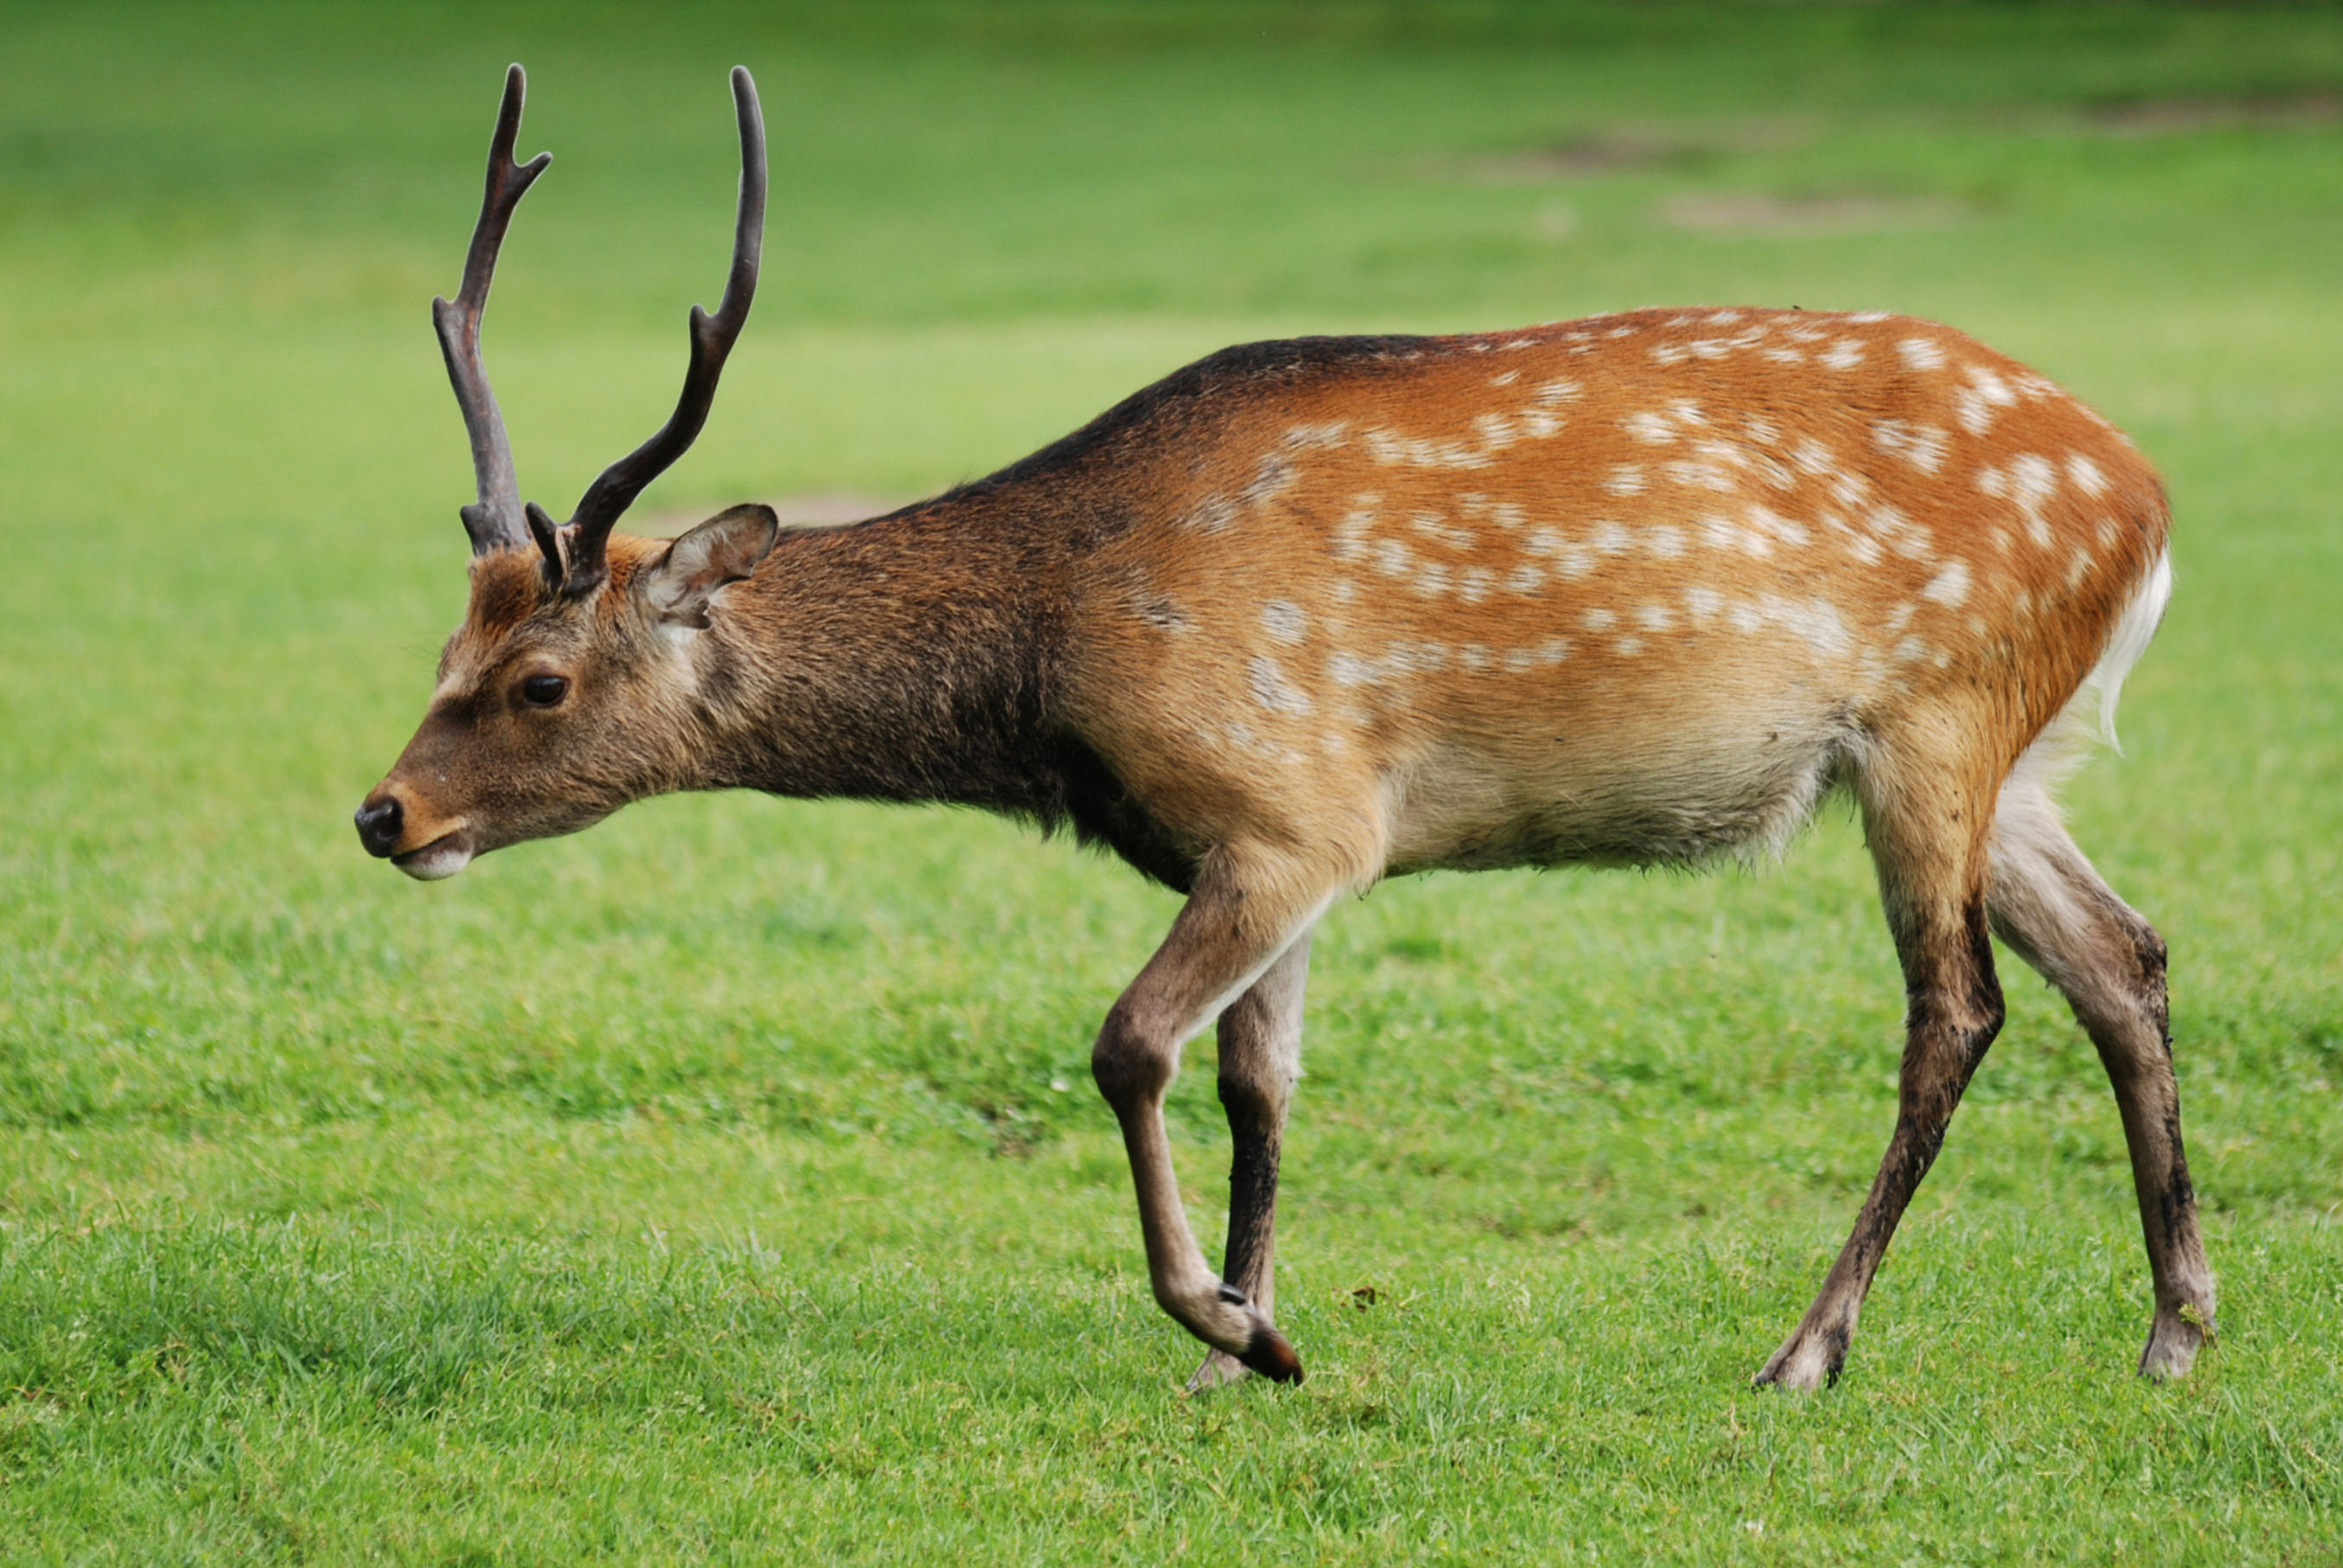 What type of animal is a sika deer?